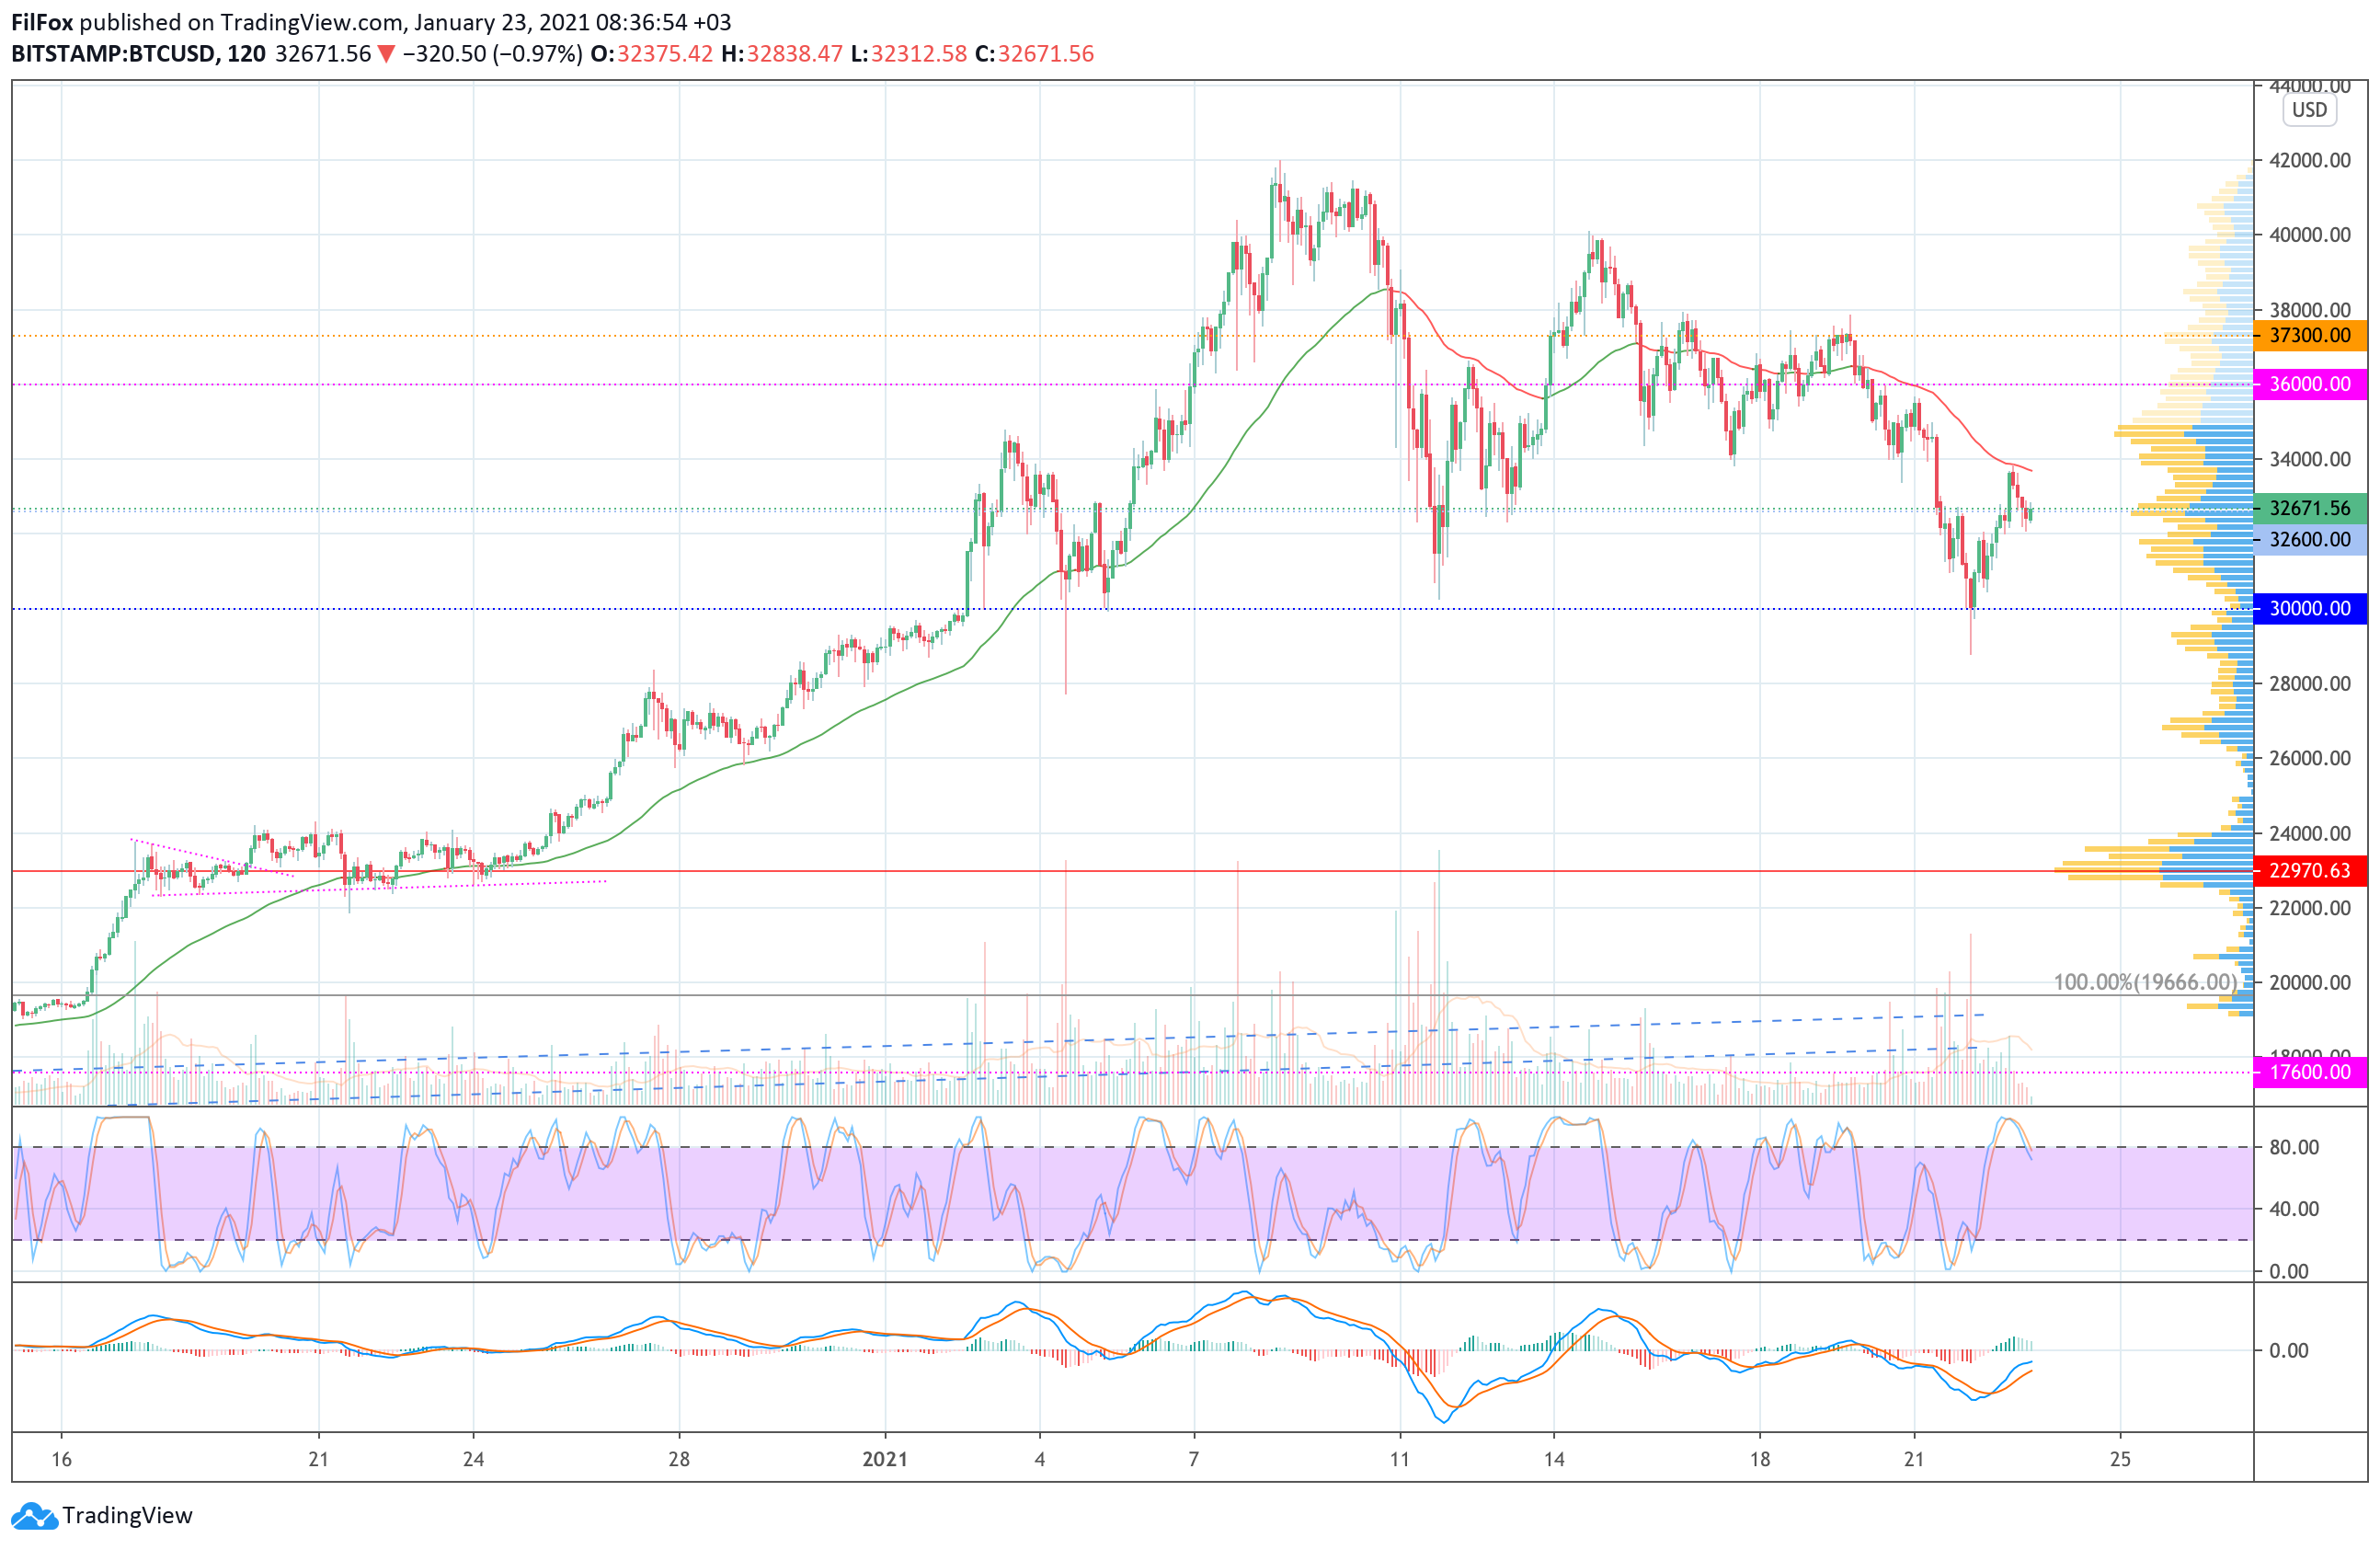 Analysis of prices for Bitcoin, Ethereum, Ripple for 01/23/2021